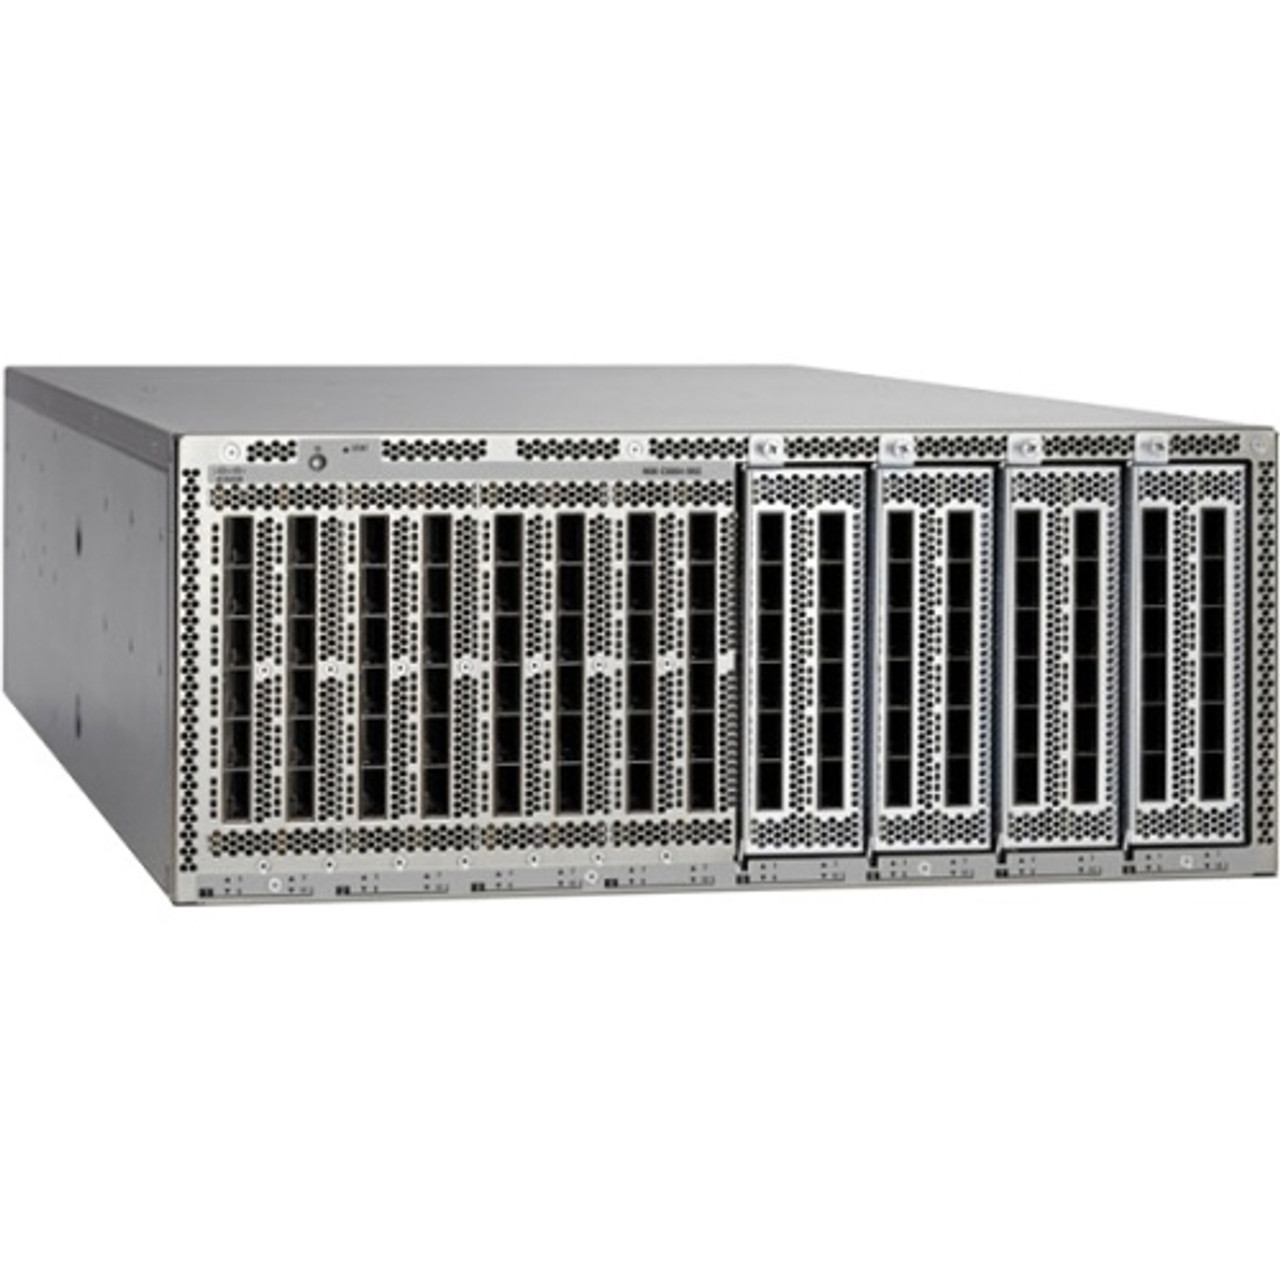 C1-N6004EF-4FEX-1G Cisco N6004 Chassis with 4 x 10G FEXes with FETs 3 Layer Supported (Refurbished)